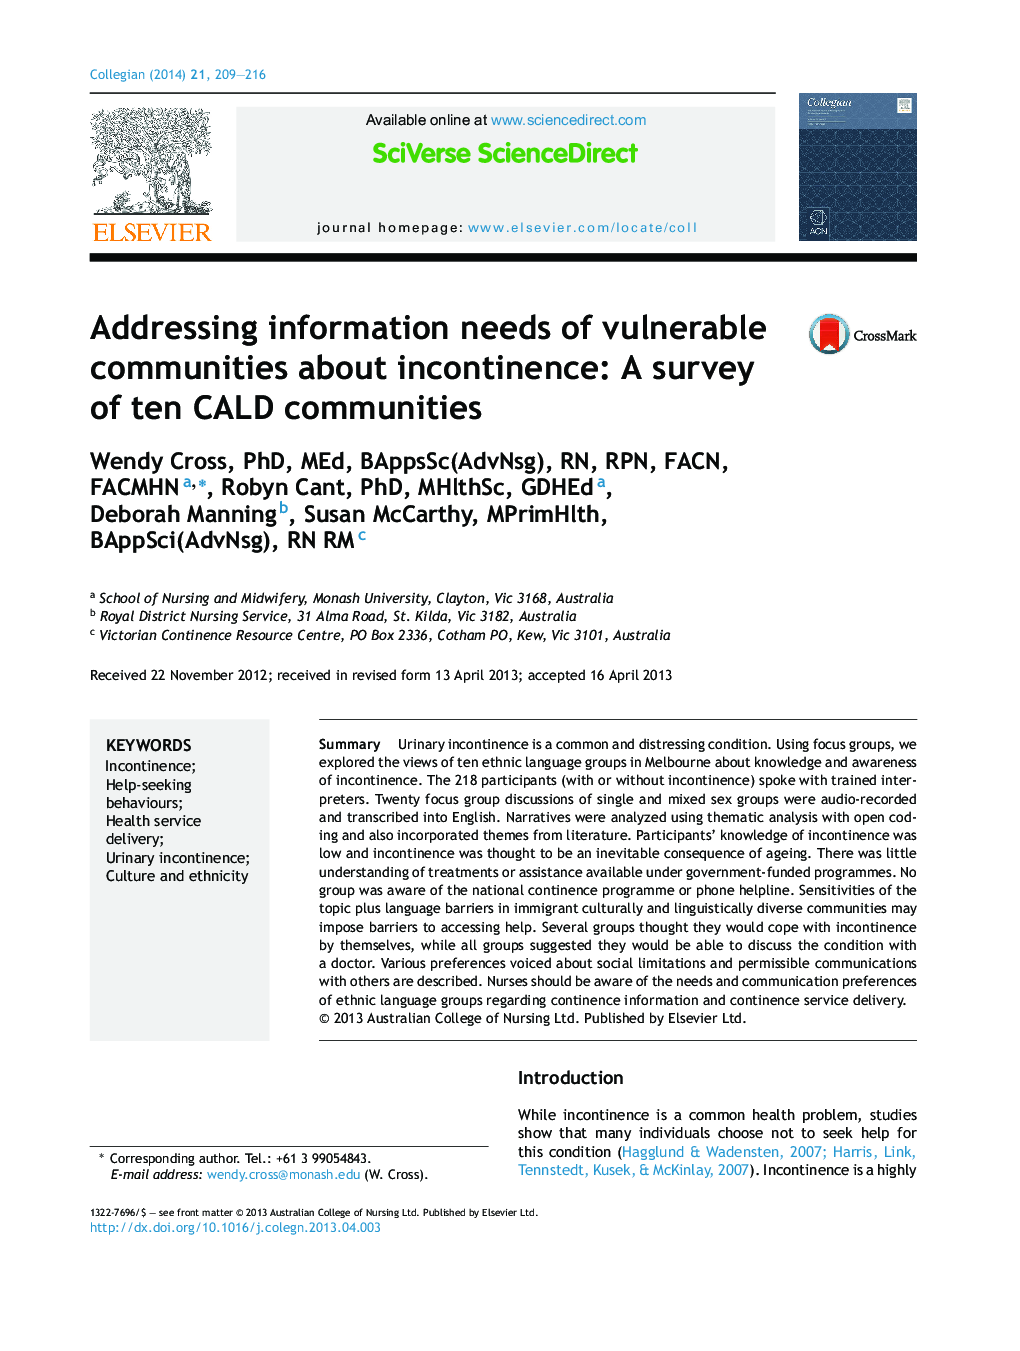 Addressing information needs of vulnerable communities about incontinence: A survey of ten CALD communities